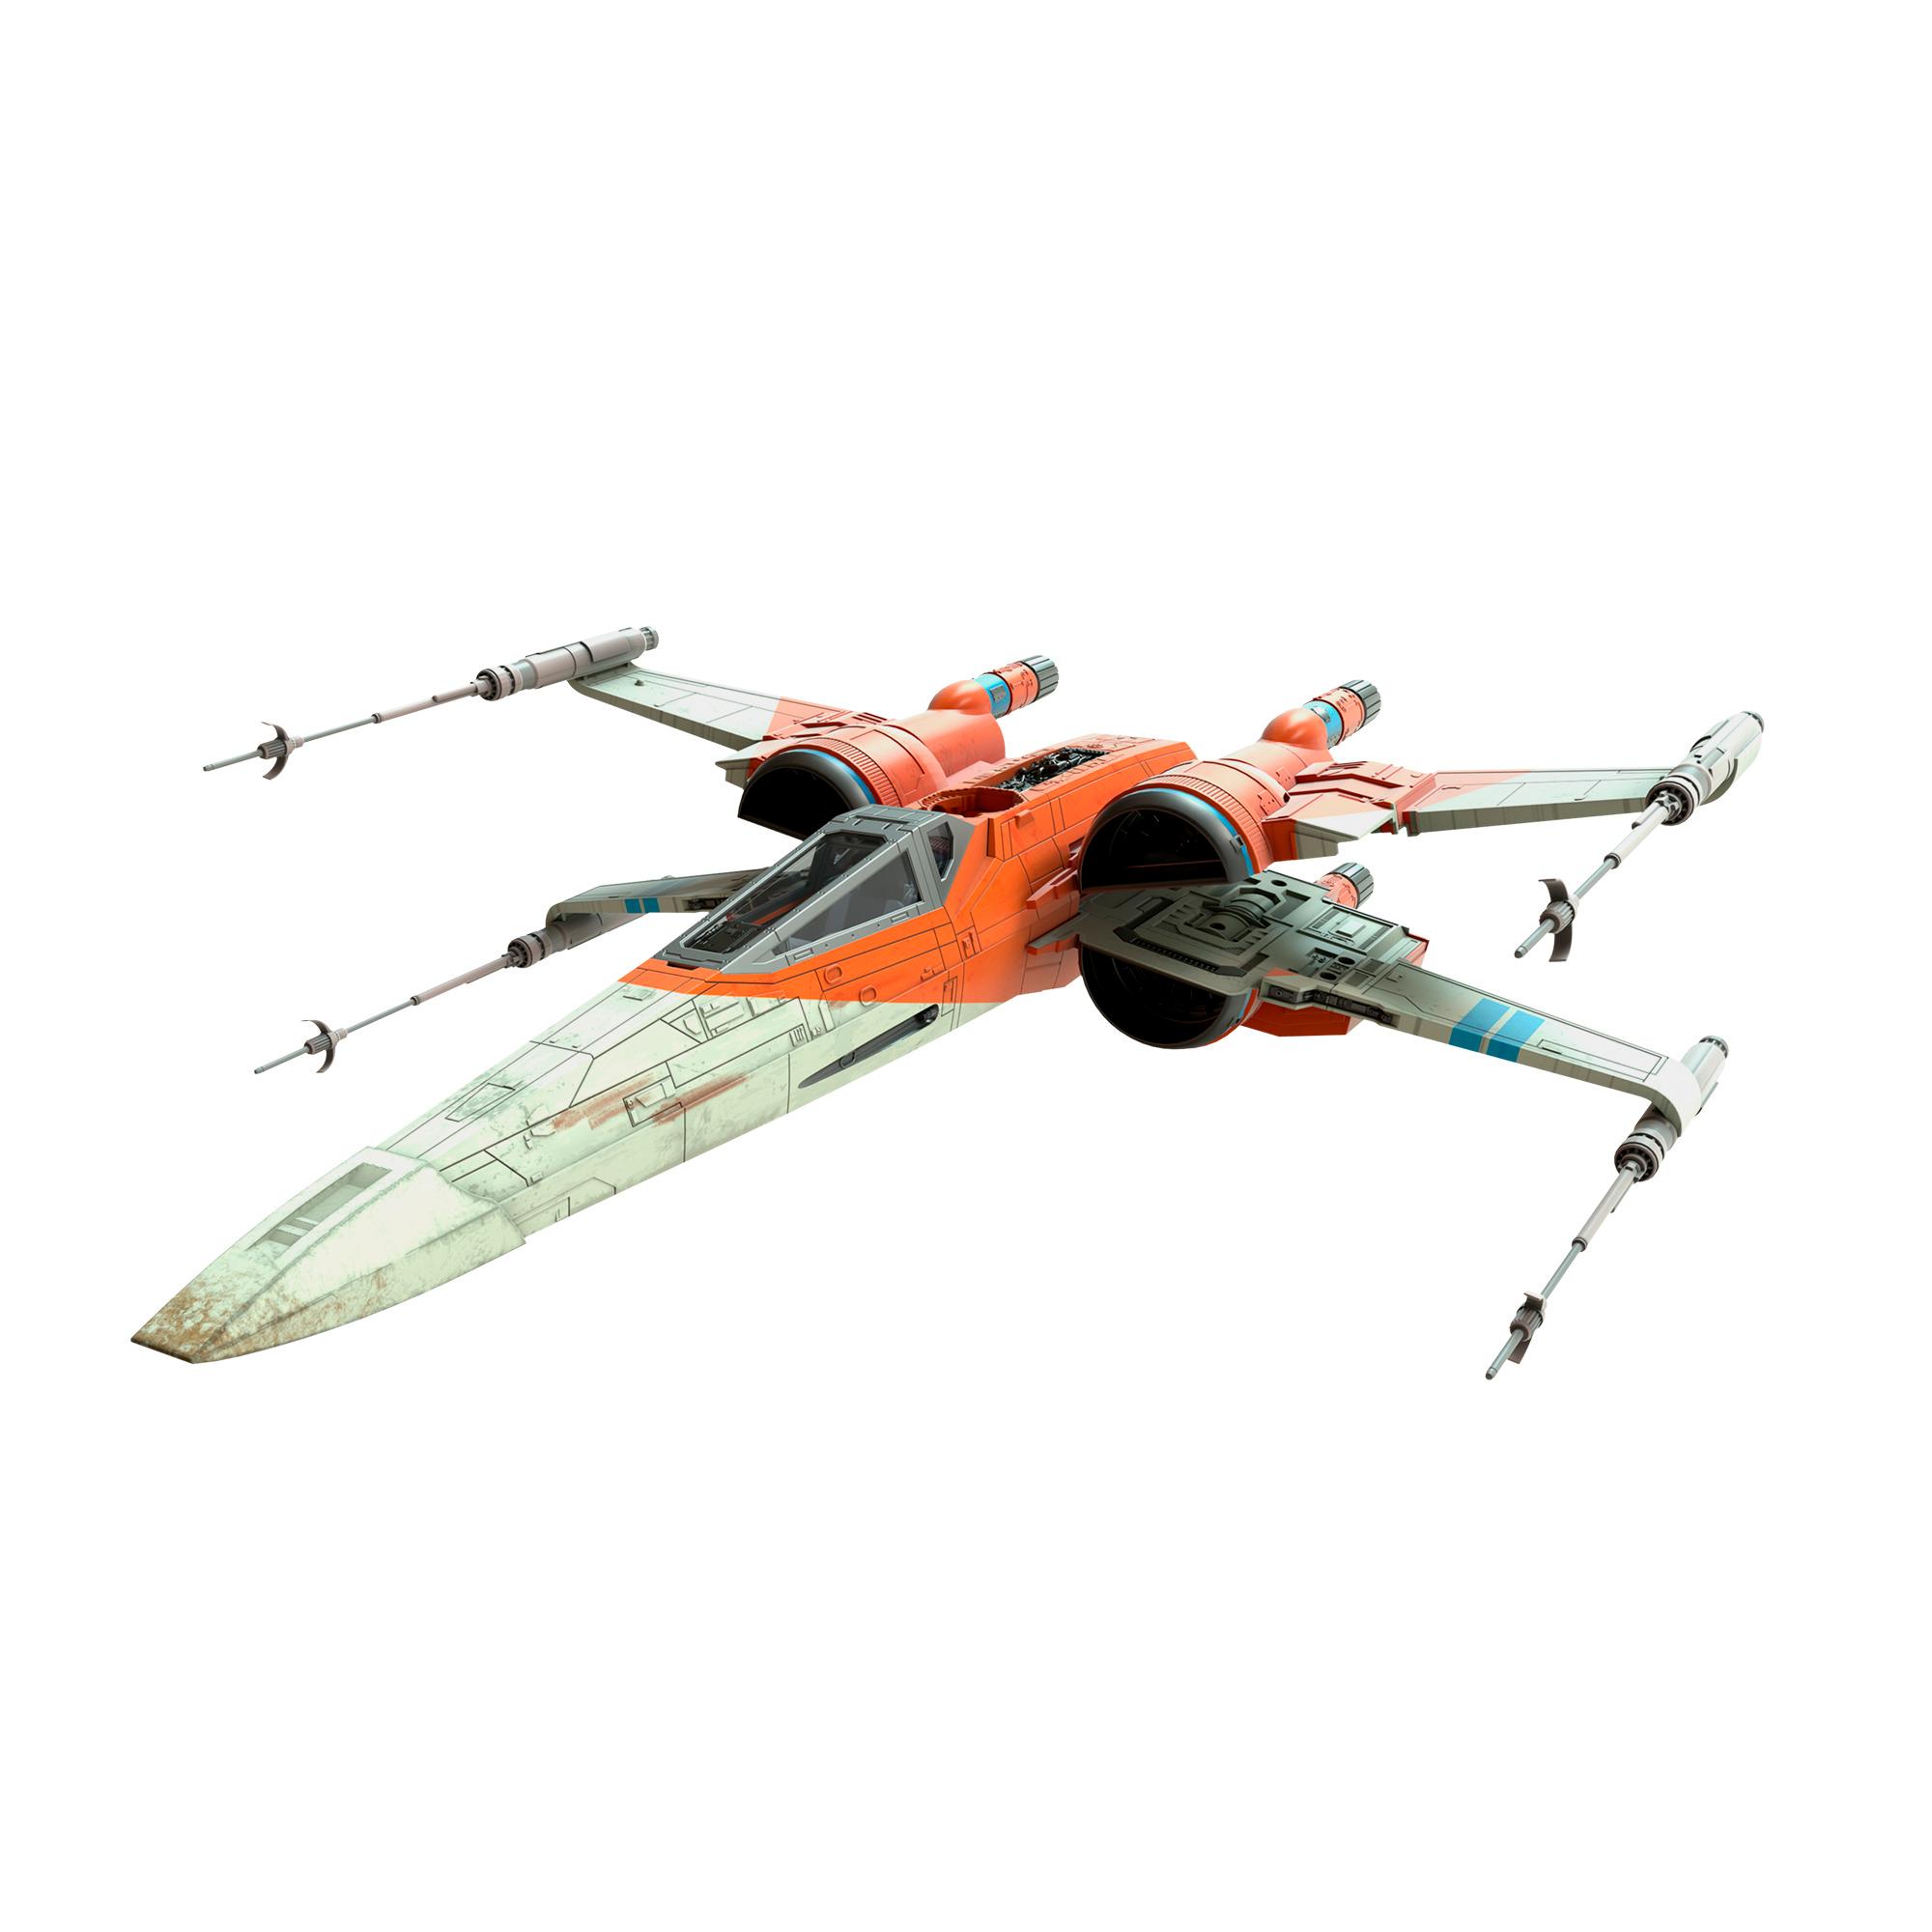 Hasbro Star Wars BS Titanium Vehicle E7 Poe's X-wing Fighter Figure Toy B4581 for sale online 